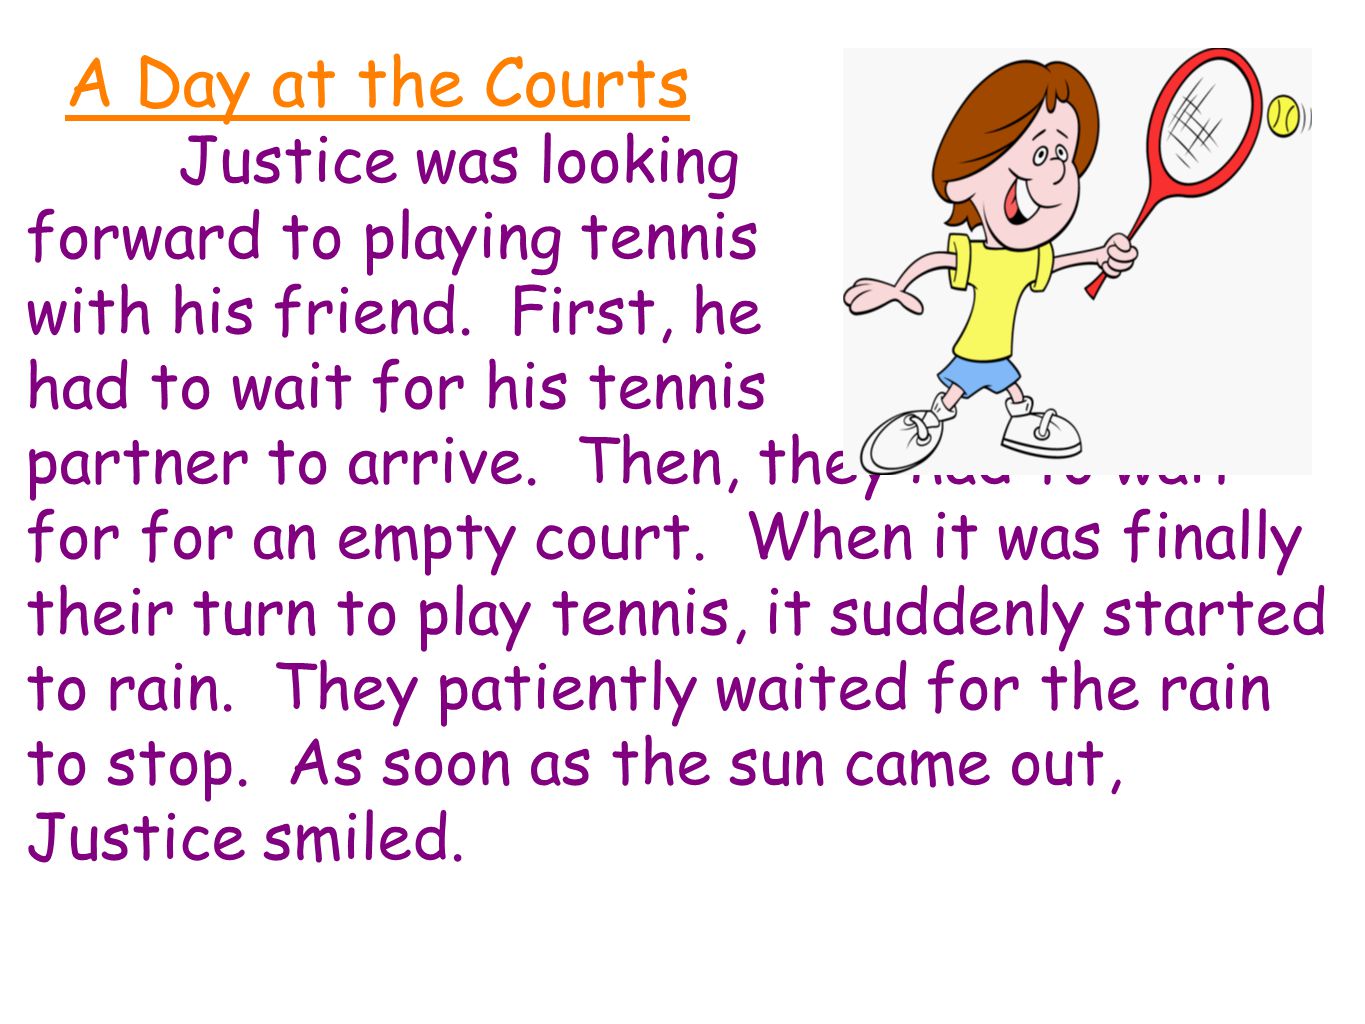 A Day at the Courts Justice was looking forward to playing tennis with his friend.